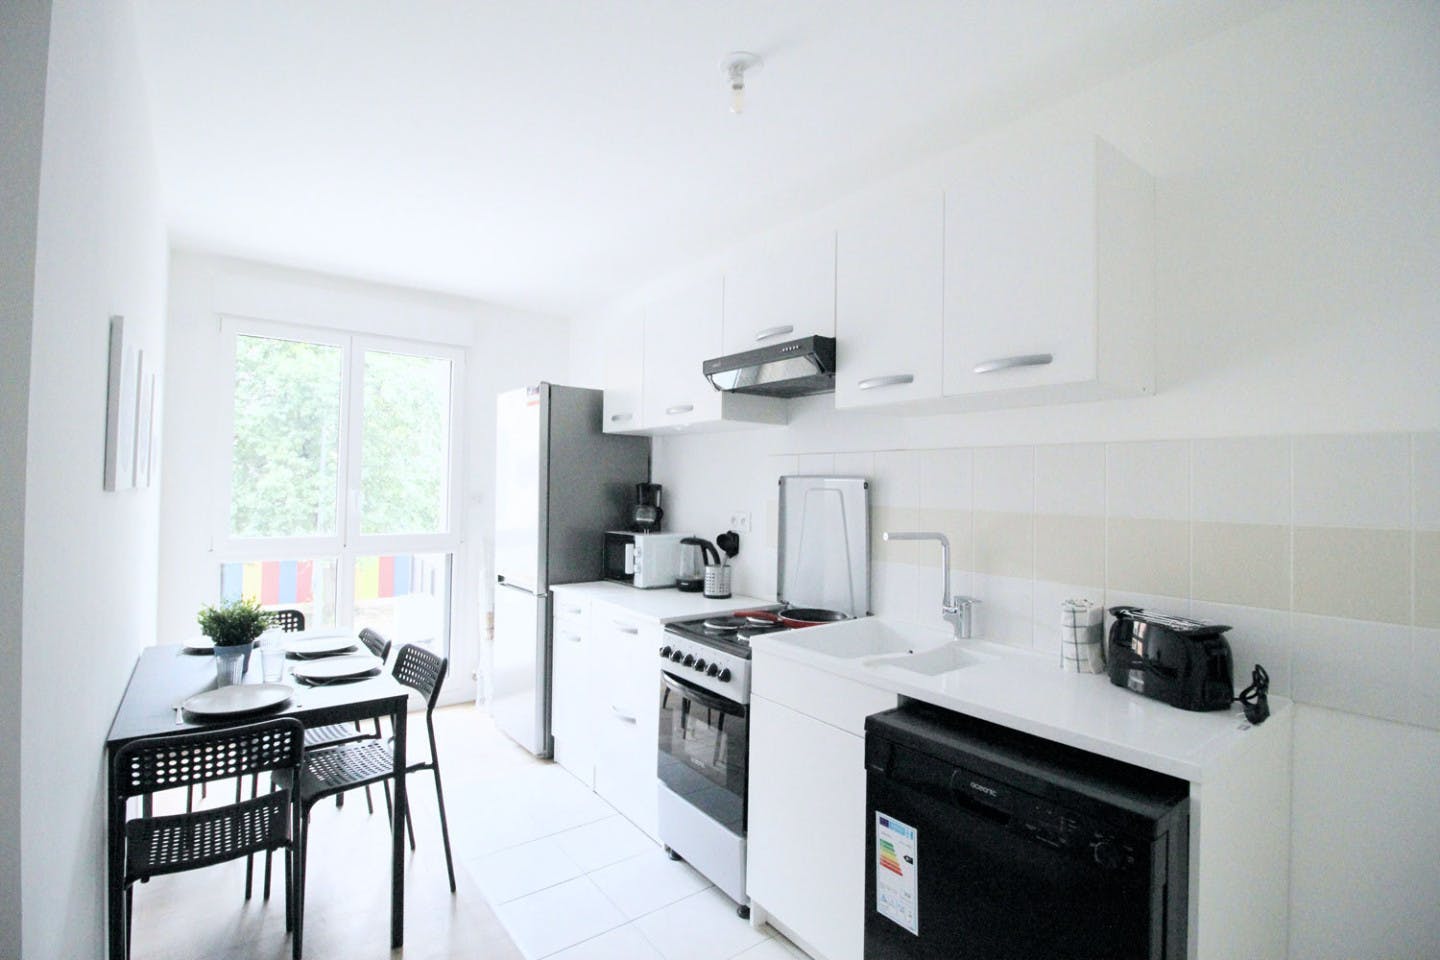 Spacious 4 bedroom apartment located in Clichy